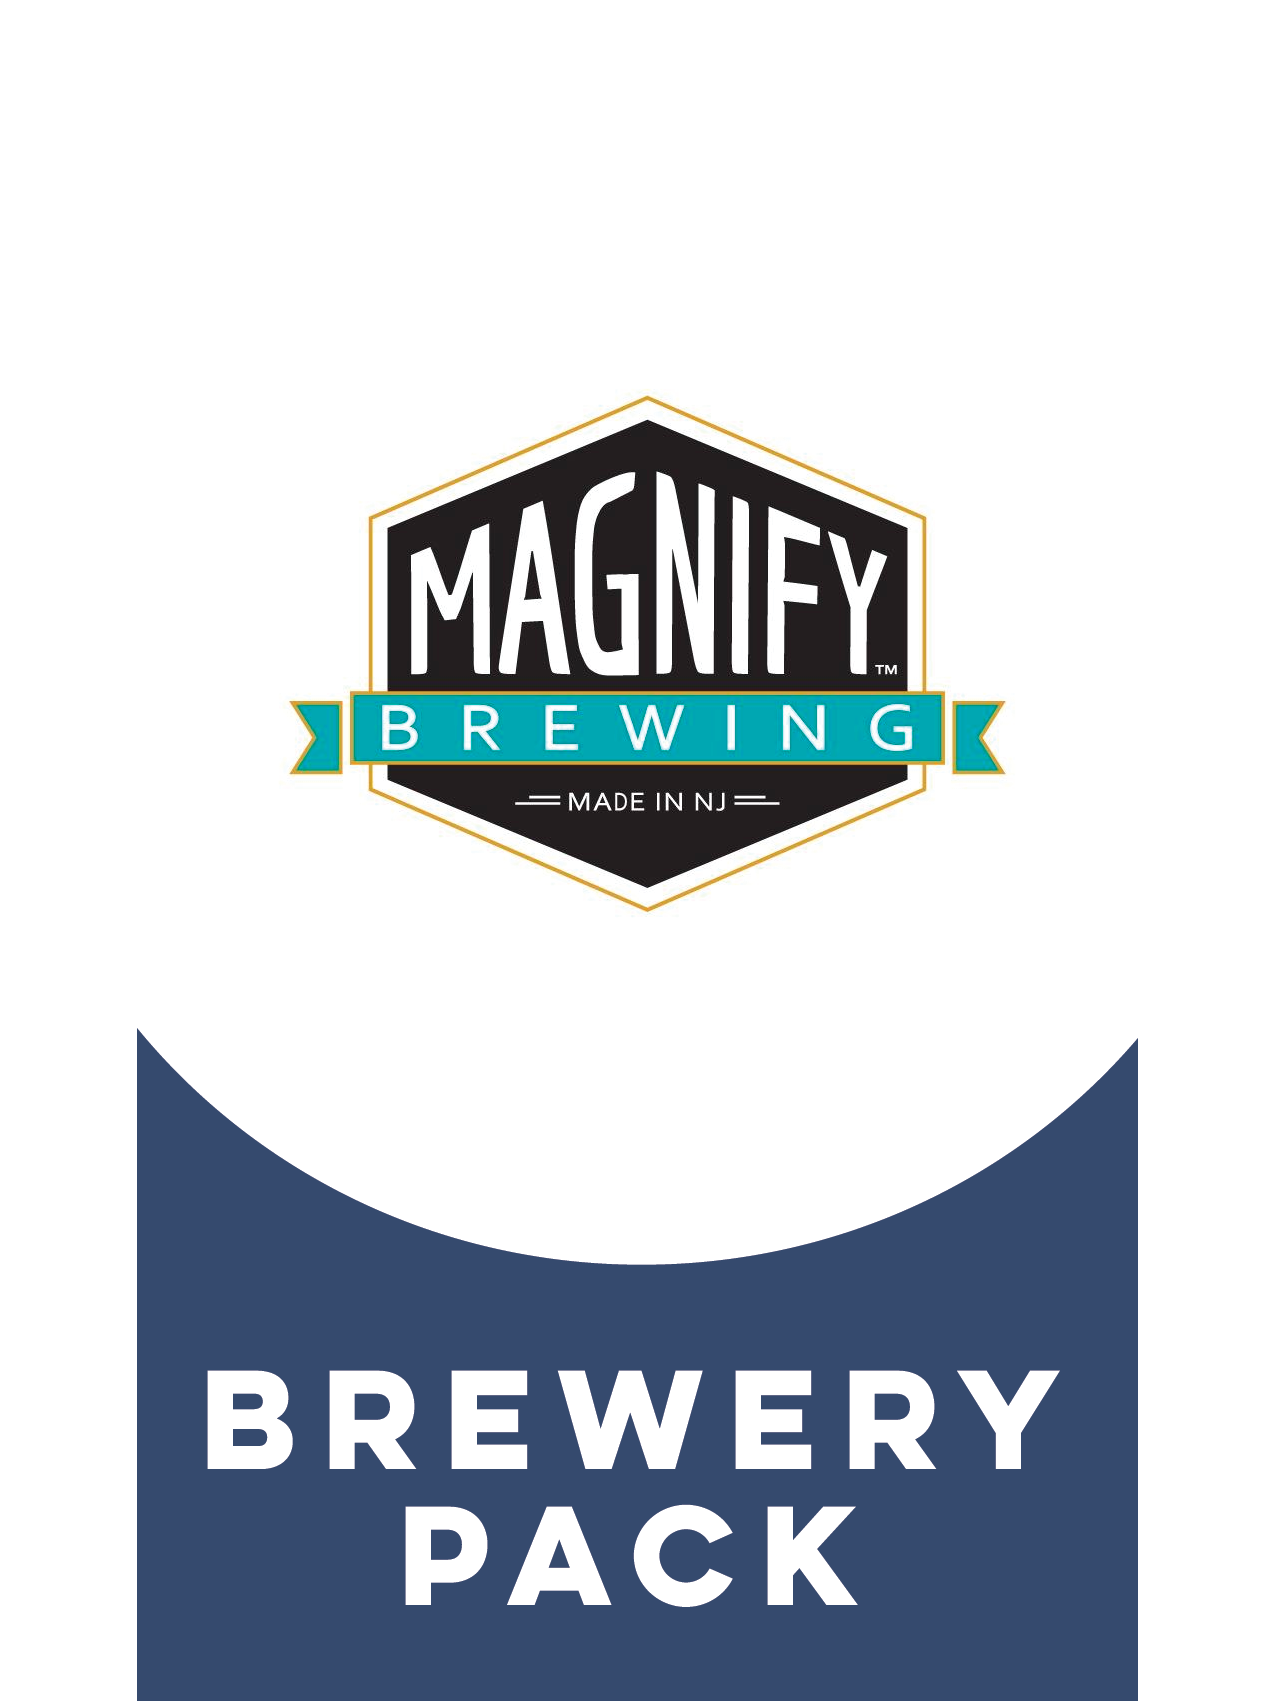 -Magnify- Magnify Brewery Pack-Packs & Cases- Only @ Beer Republic - The best online beer store for American & Canadian craft beer - Buy beer online from the USA and Canada - Bier online kopen - Amerikaans bier kopen - Craft beer store - Craft beer kopen - Amerikanisch bier kaufen - Bier online kaufen - Acheter biere online - IPA - Stout - Porter - New England IPA - Hazy IPA - Imperial Stout - Barrel Aged - Barrel Aged Imperial Stout - Brown - Dark beer - Blond - Blonde - Pilsner - Lager - Wheat - Weizen - 